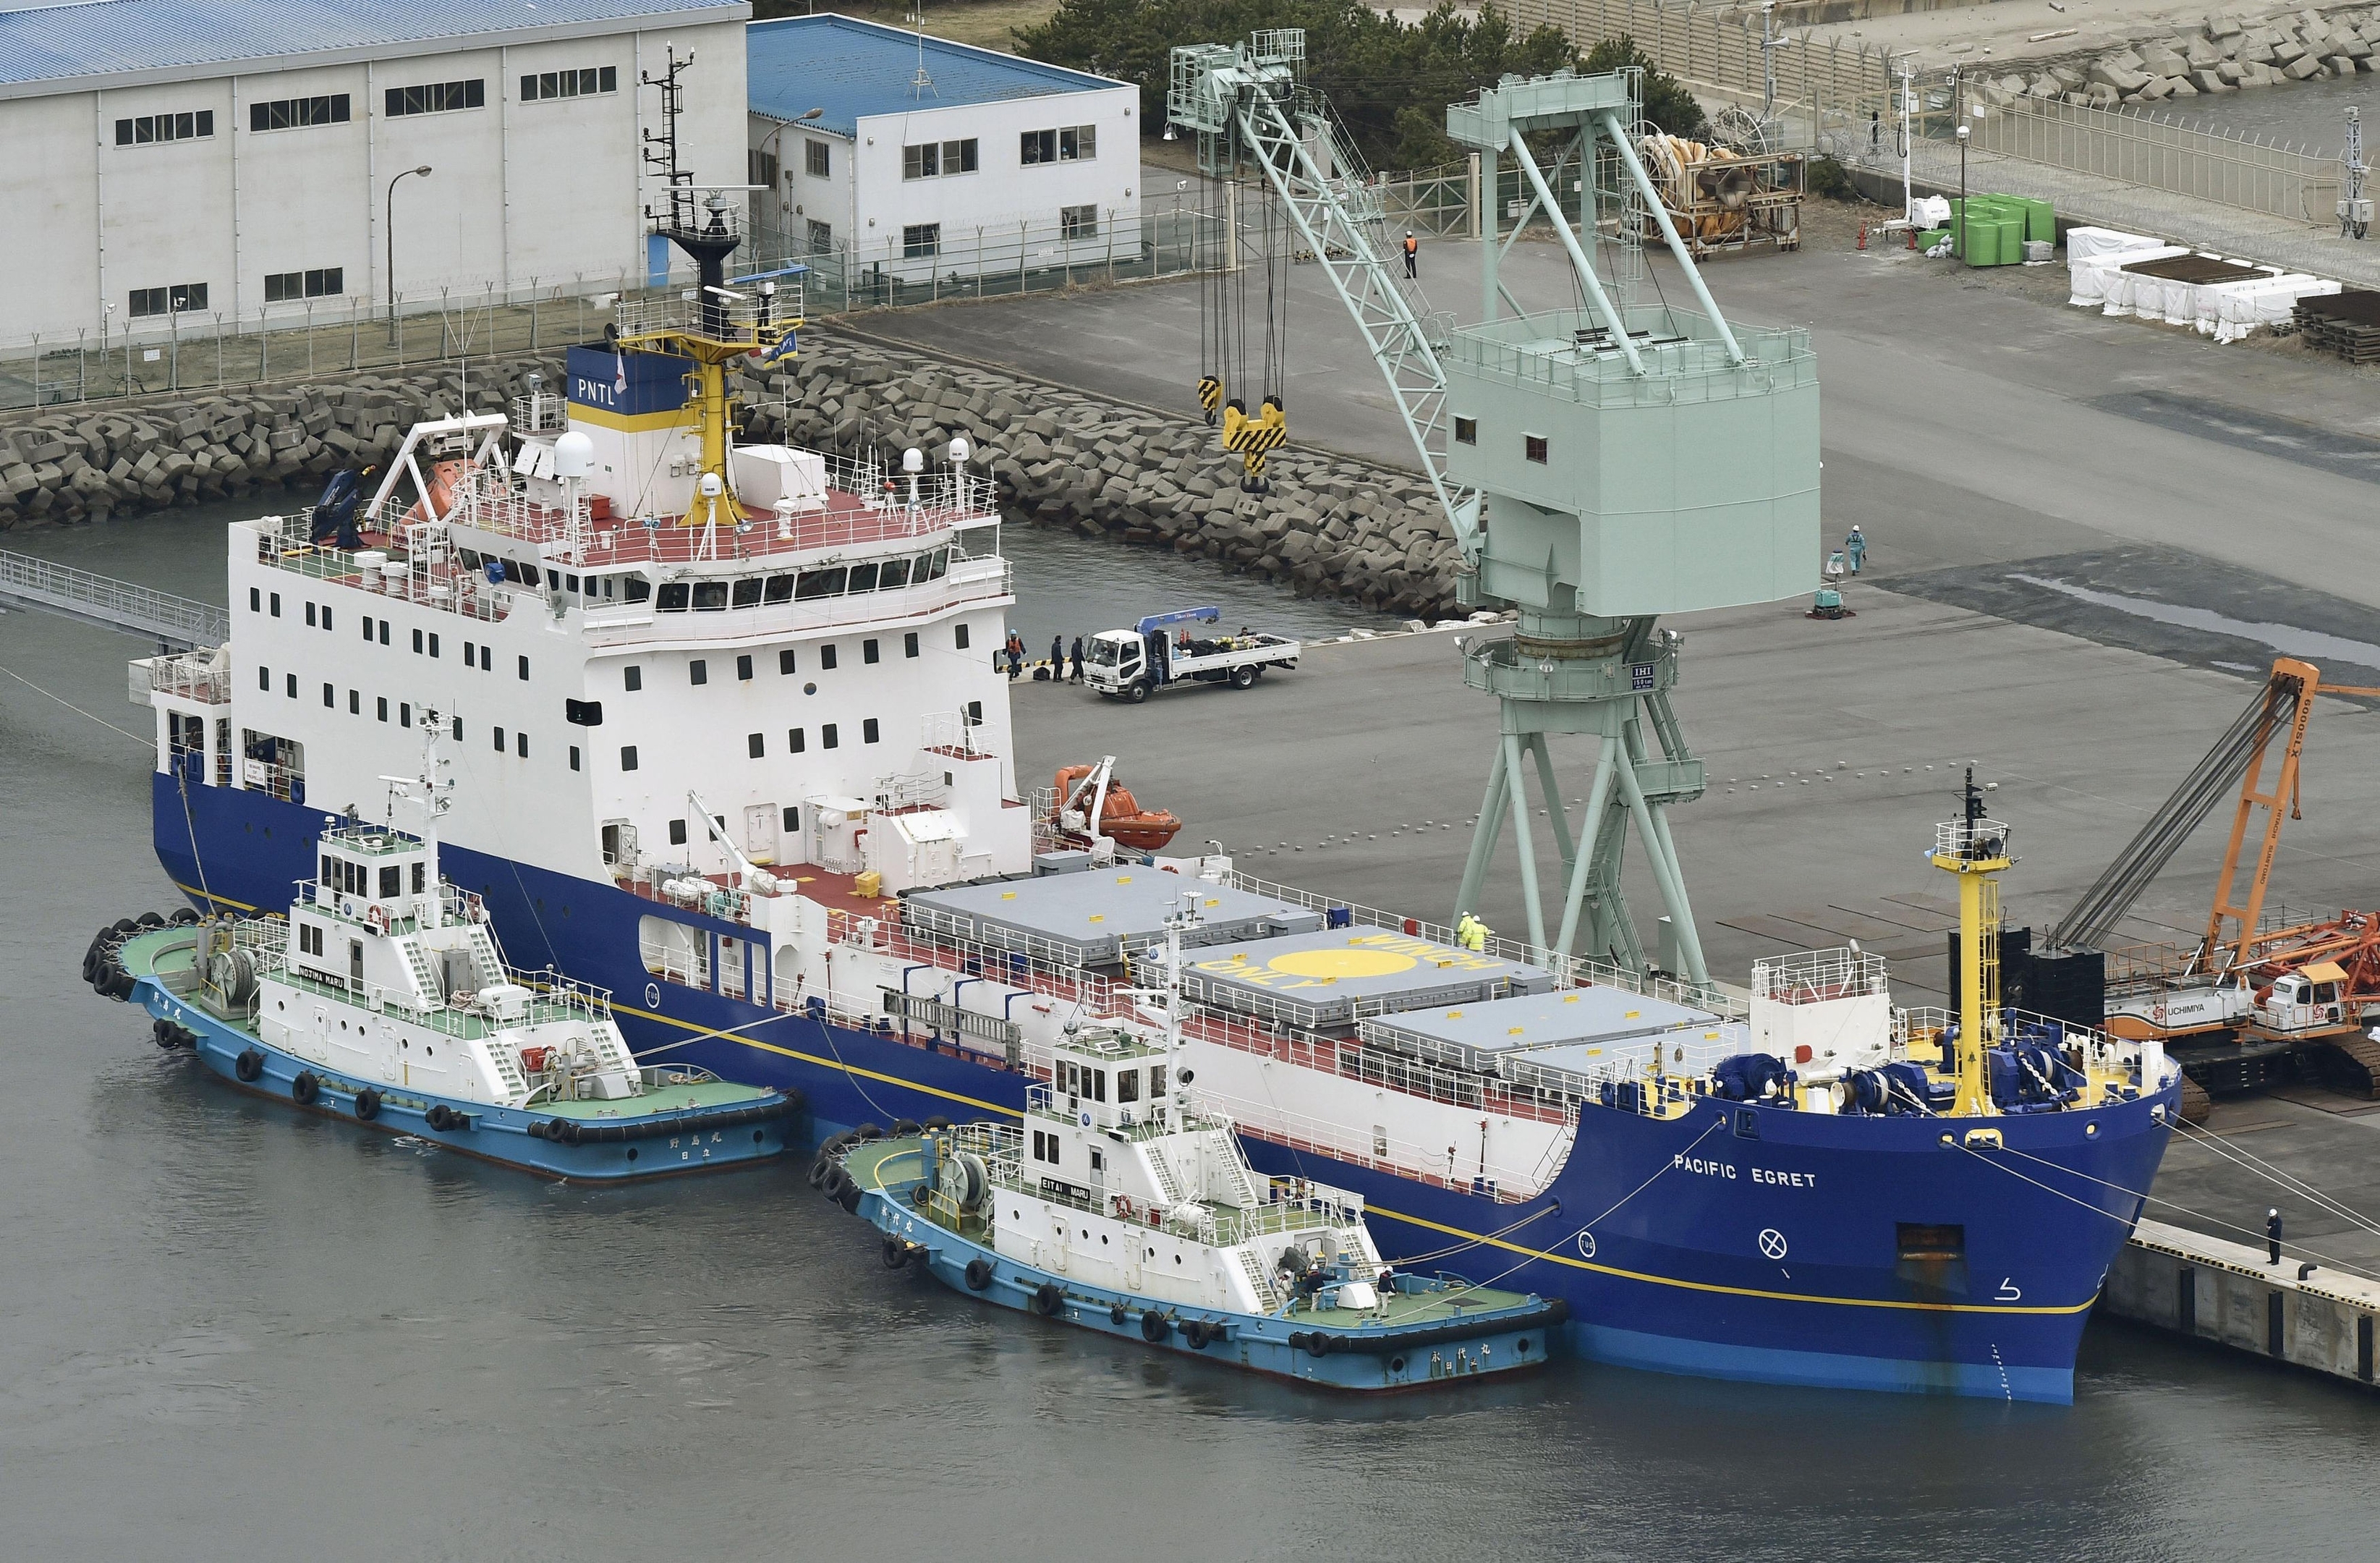 The Pacific Egret, one of the two British-flagged ships arrived in Japan, is anchored at a port in the village of Tokai, northeast of Tokyo